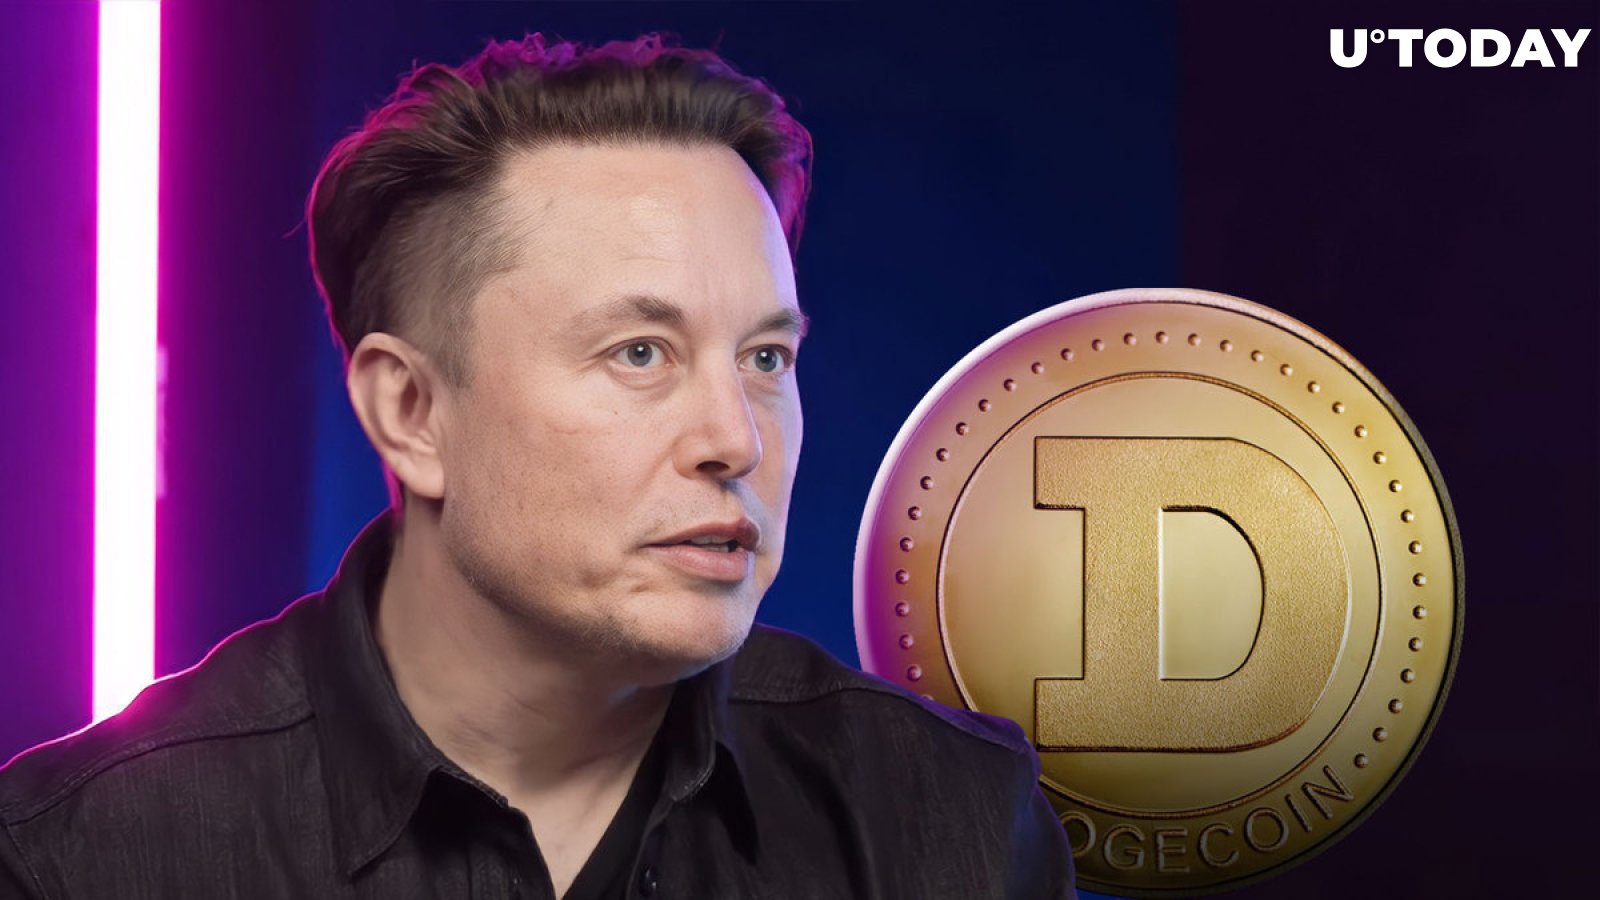 This Elon Musk Company Accepts Dogecoin: DOGE Insider